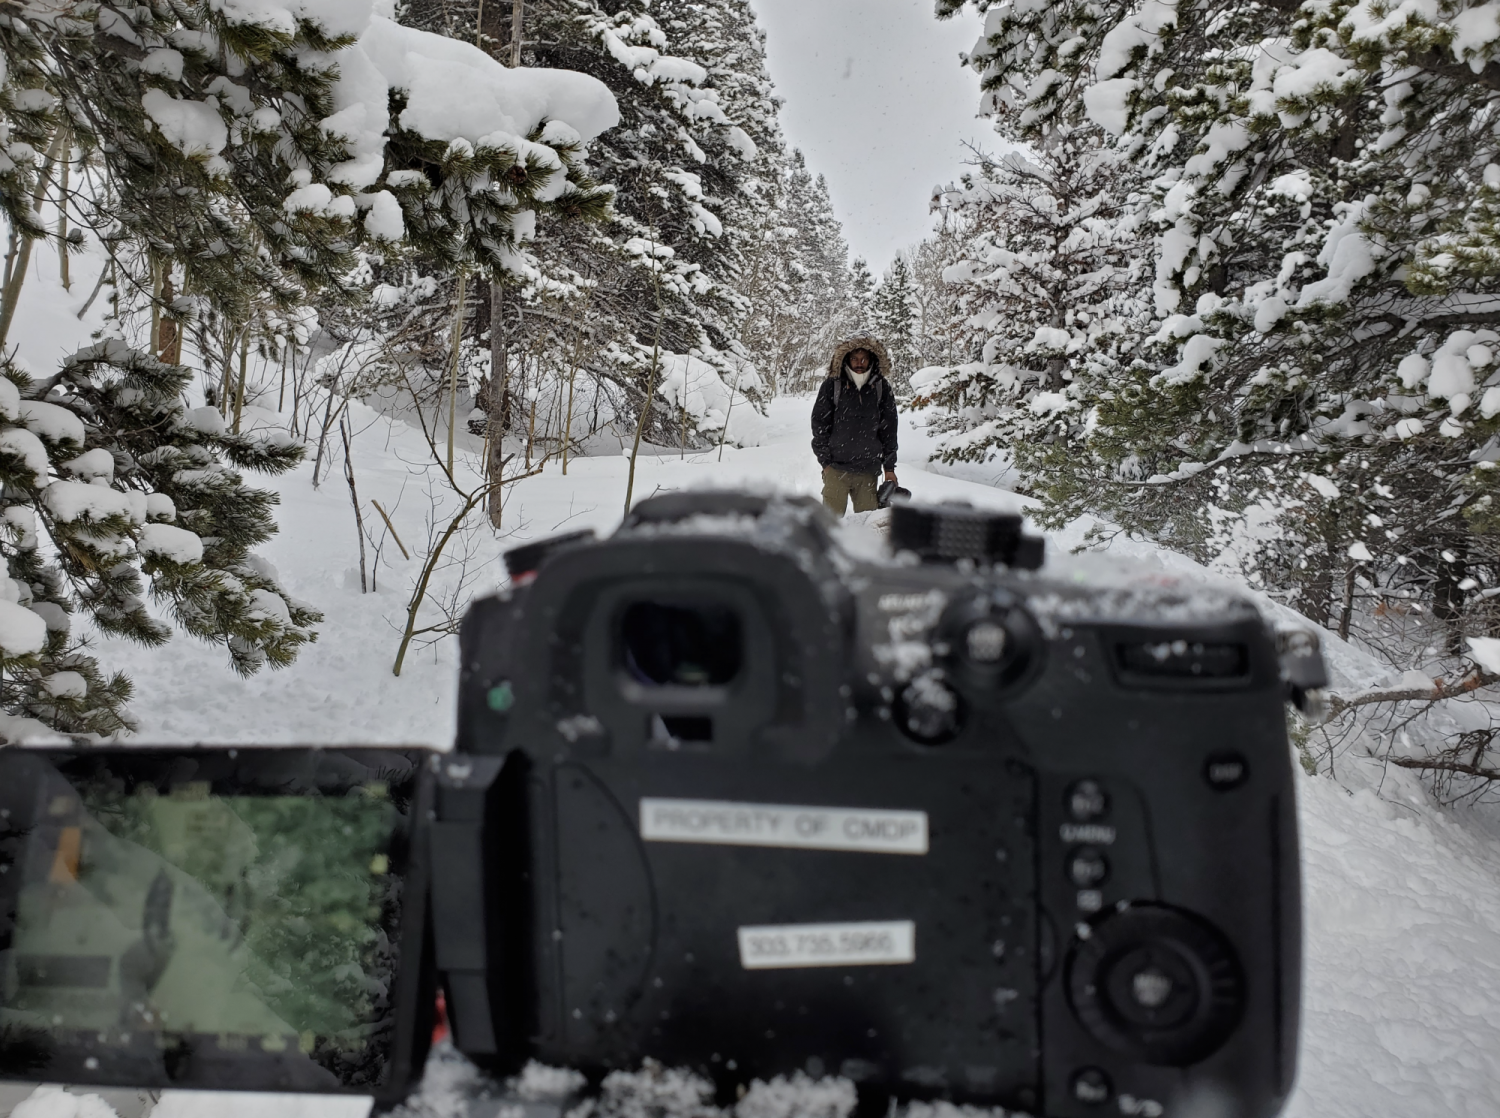 Behind the scenes camera view of actor in the snow